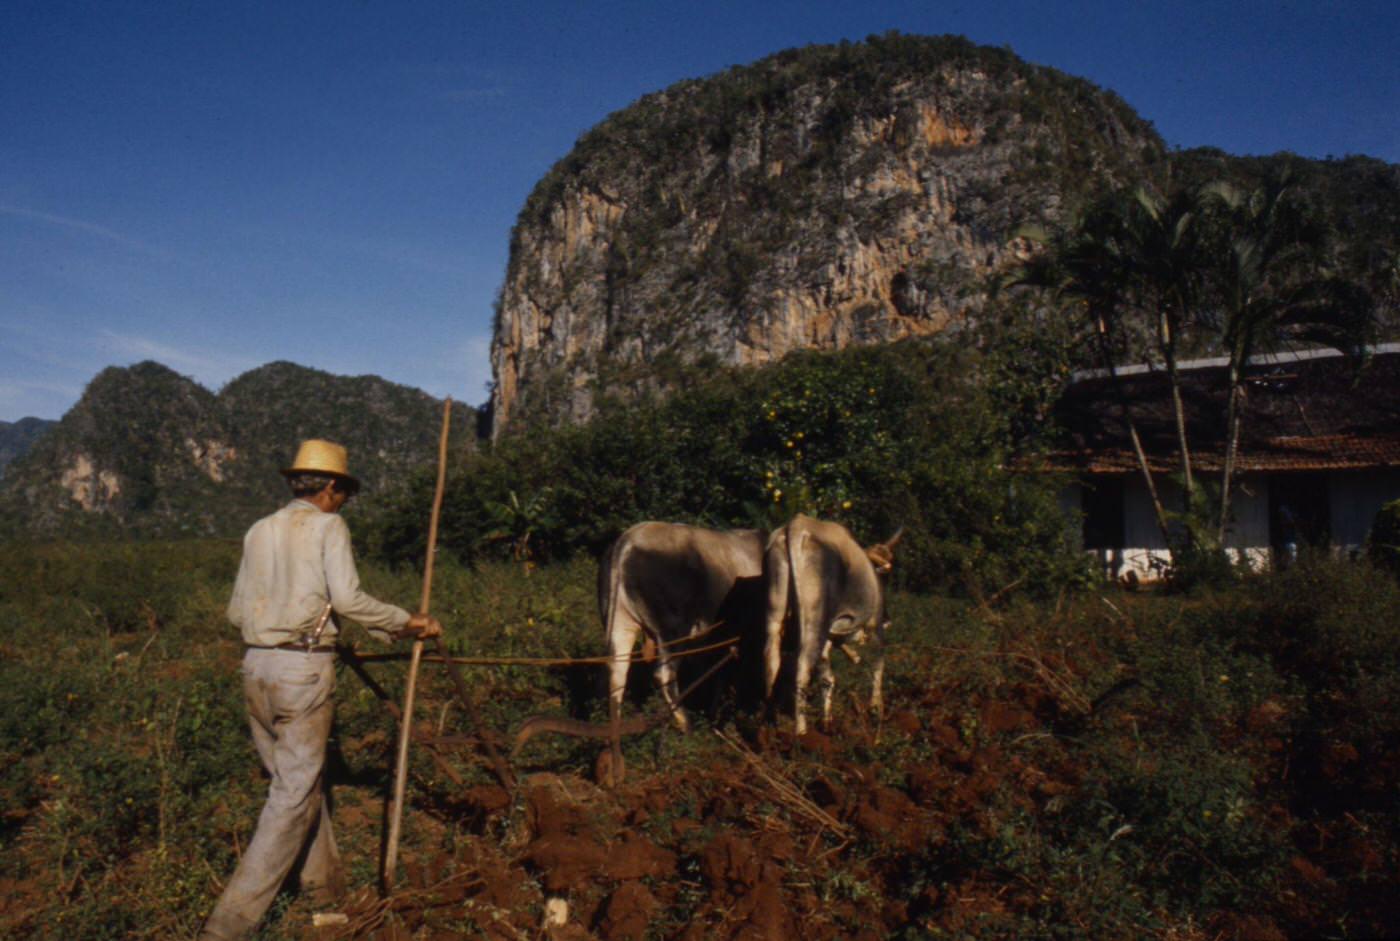 Farmer plowing with oxen in the Vinales Valley, featured in 'Closeup: Cuba - The Castro Generation', Cuba, 1977.